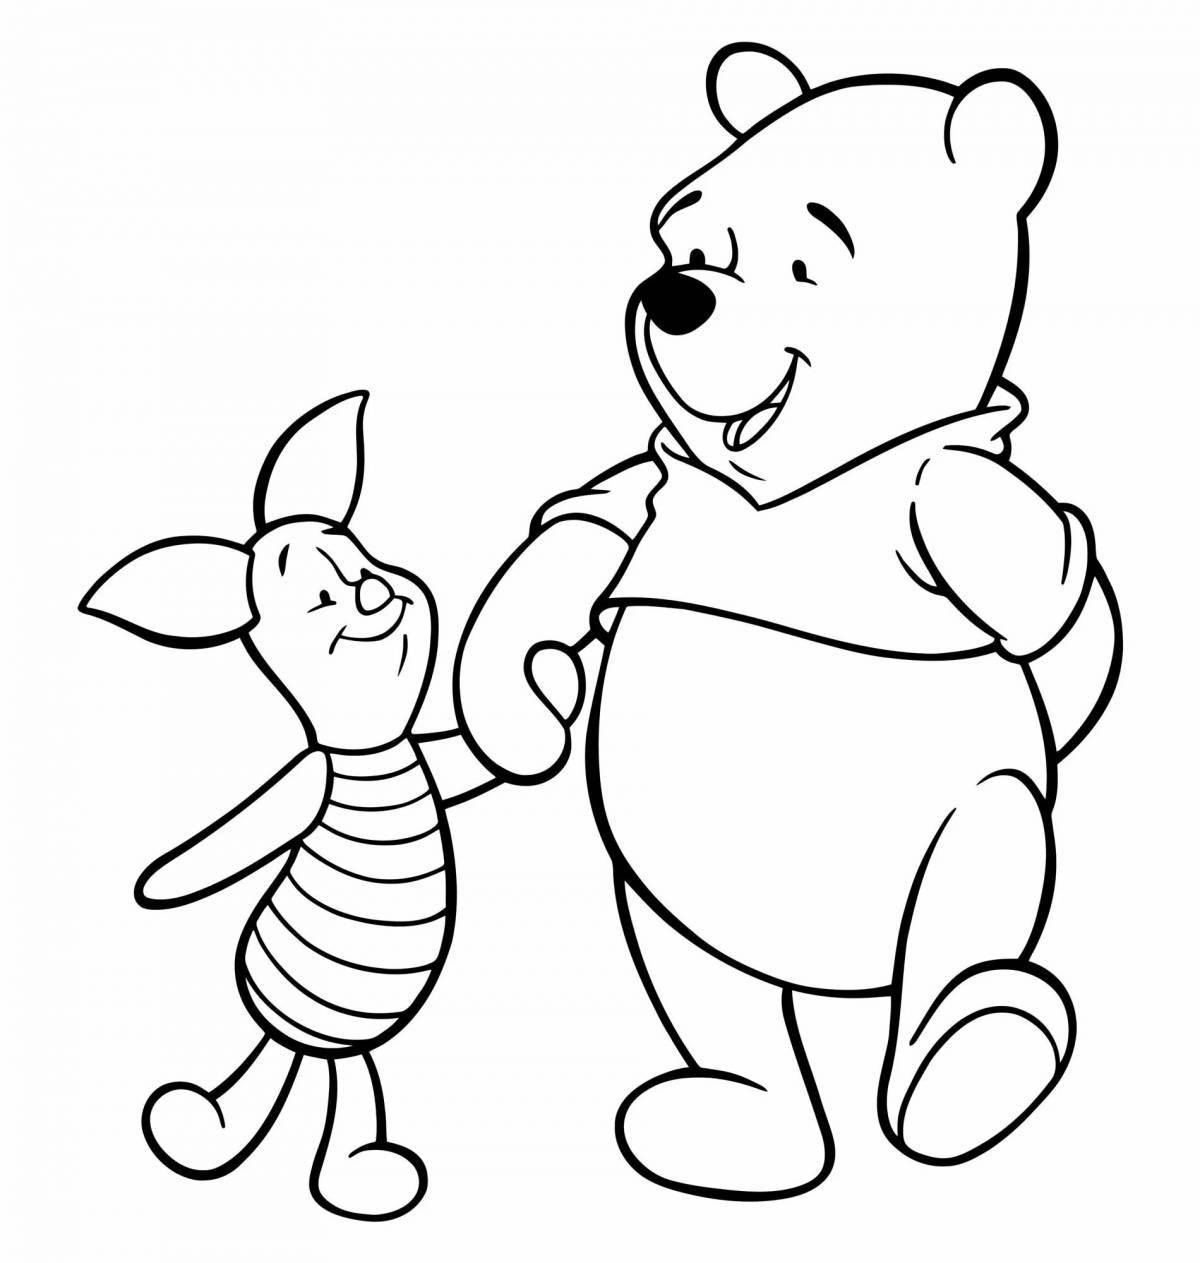 Coloring book fascinating winnie the pooh